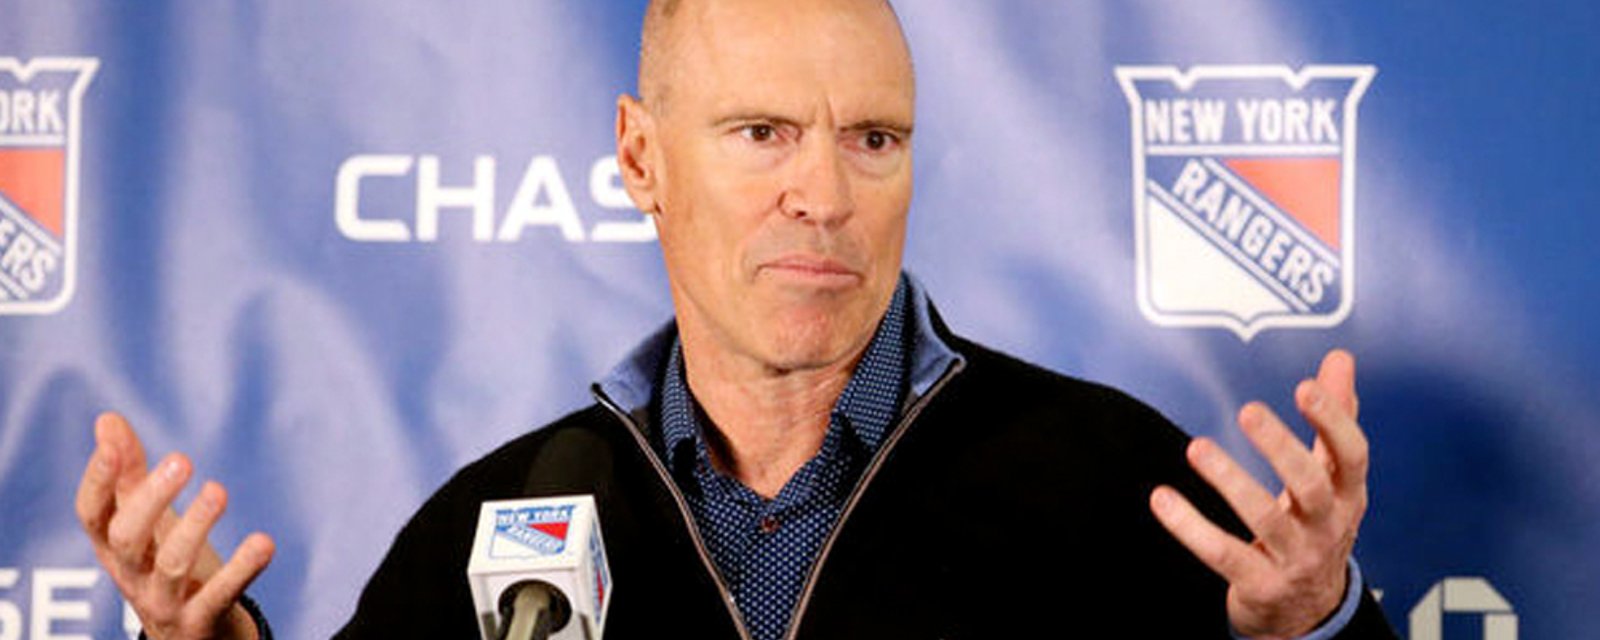 A clearly jilted Mark Messier criticizes Rangers for front office moves